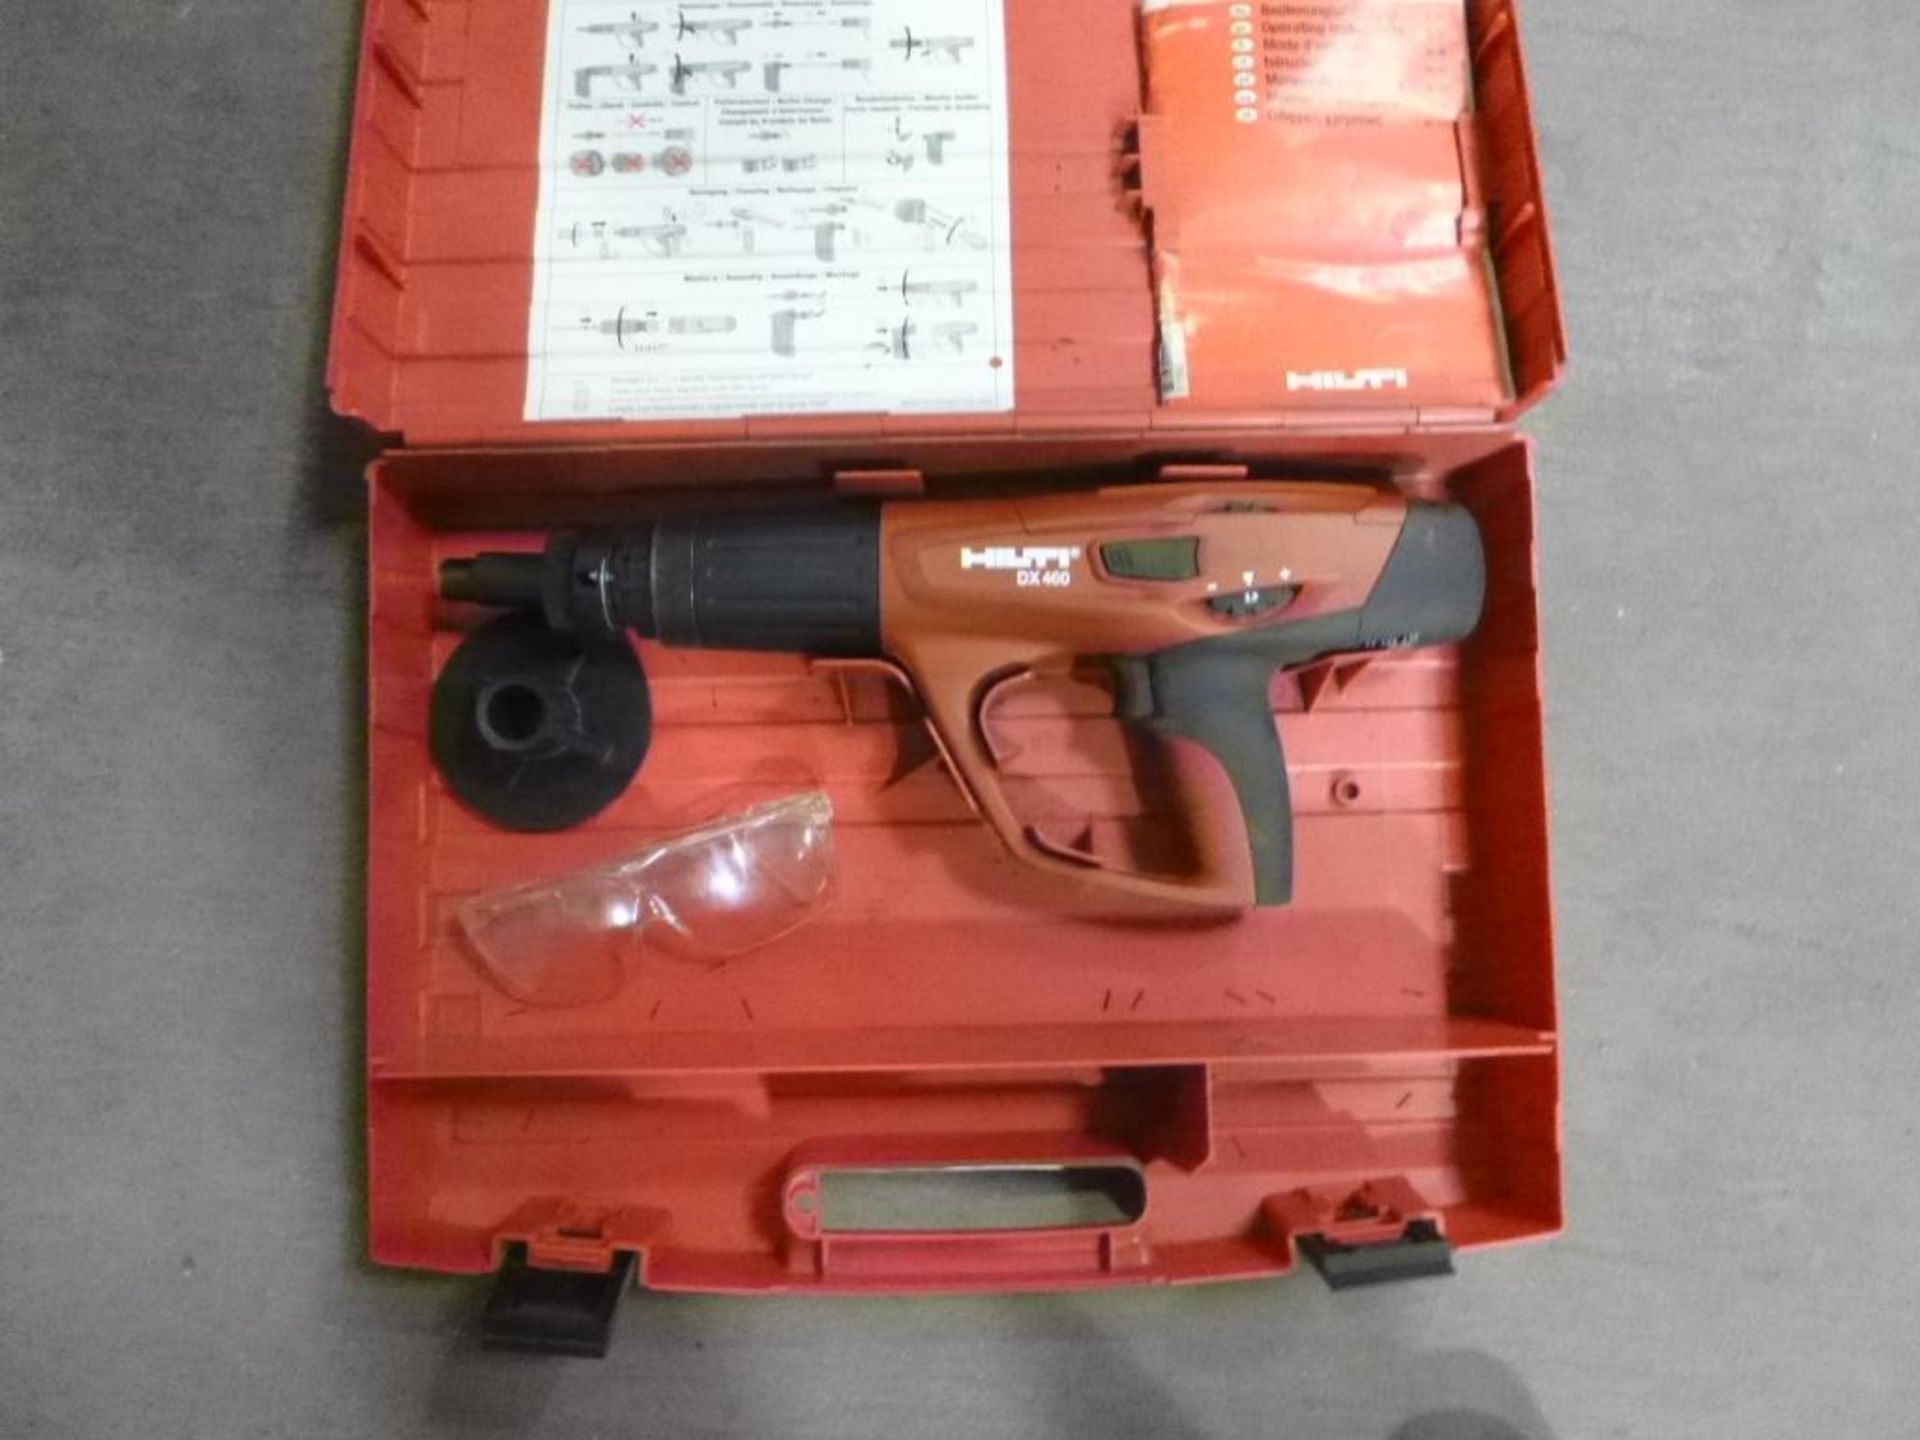 LOT: Hilti DX 460 Stud Gun, 27 Cal. Auto., with Loads & Nails - Image 2 of 6